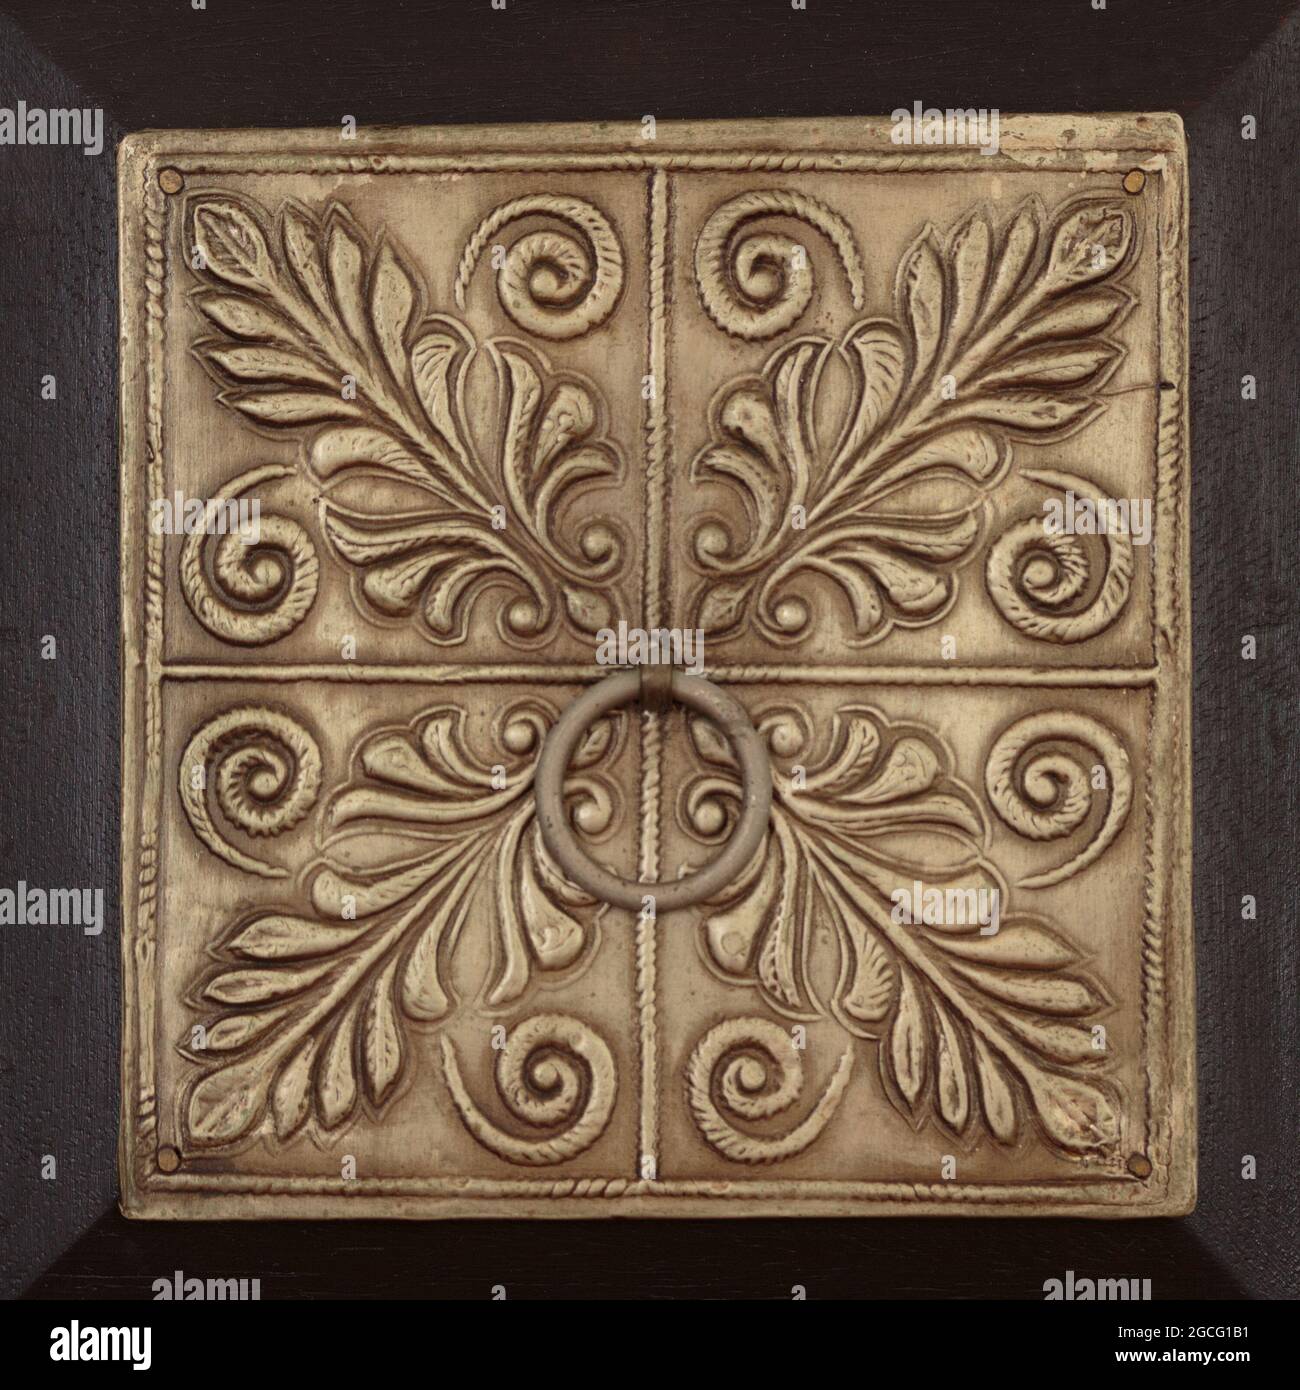 a square, decorative stamped metal panel of a dark wooden drawer with stylized botanical motifs and a circular pull in the center, in brown tones Stock Photo